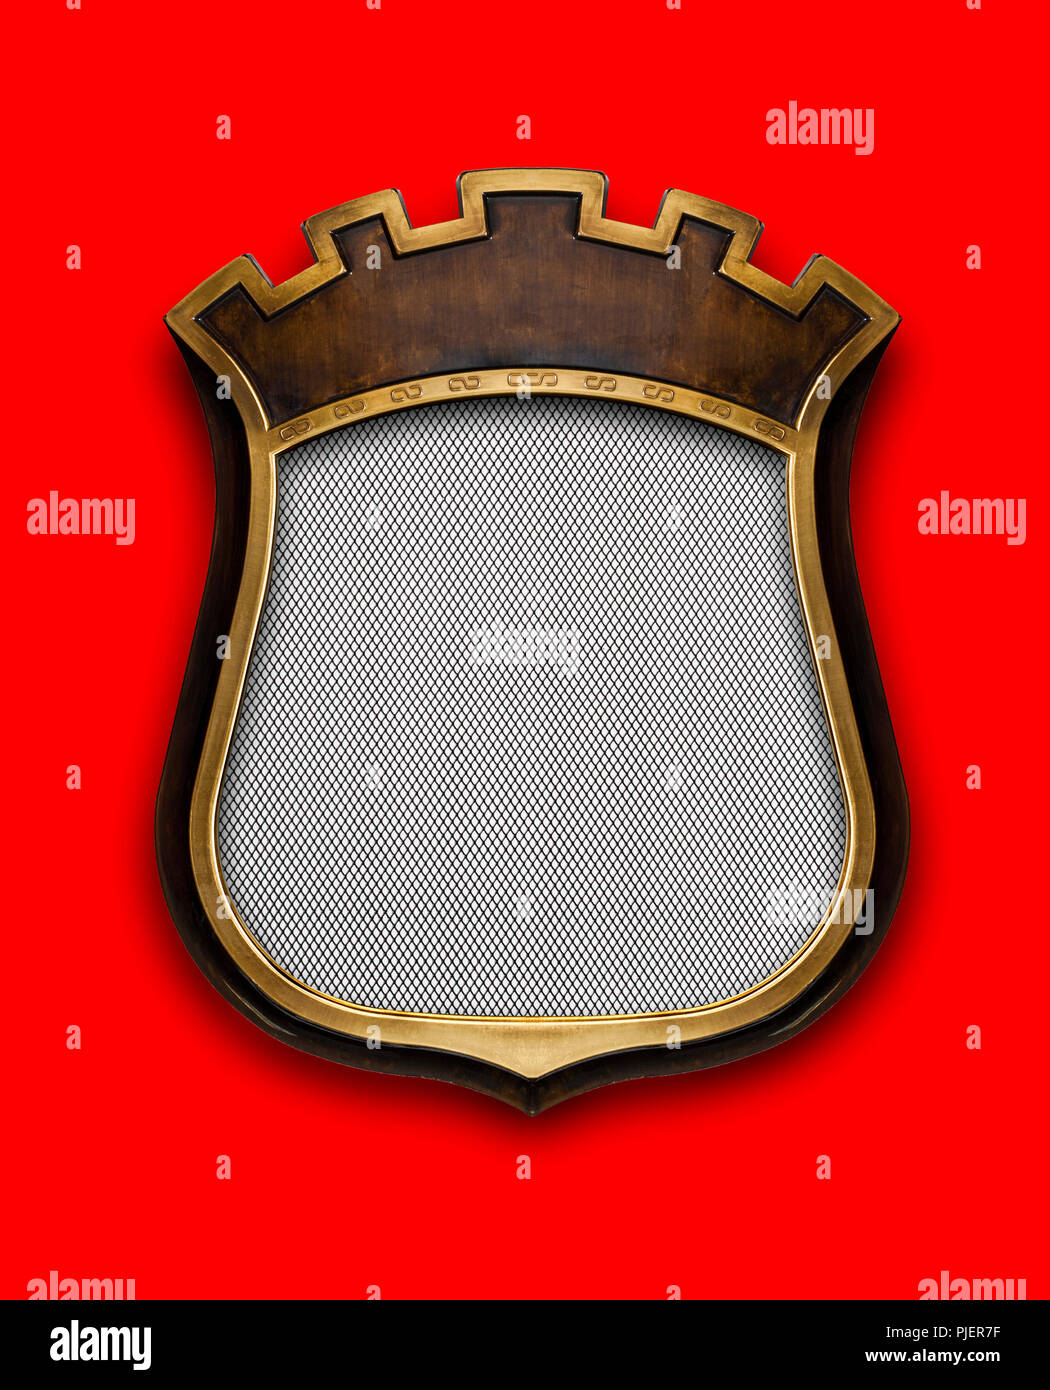 Heraldic shield diploma in wooden frame isolated on red Stock Photo